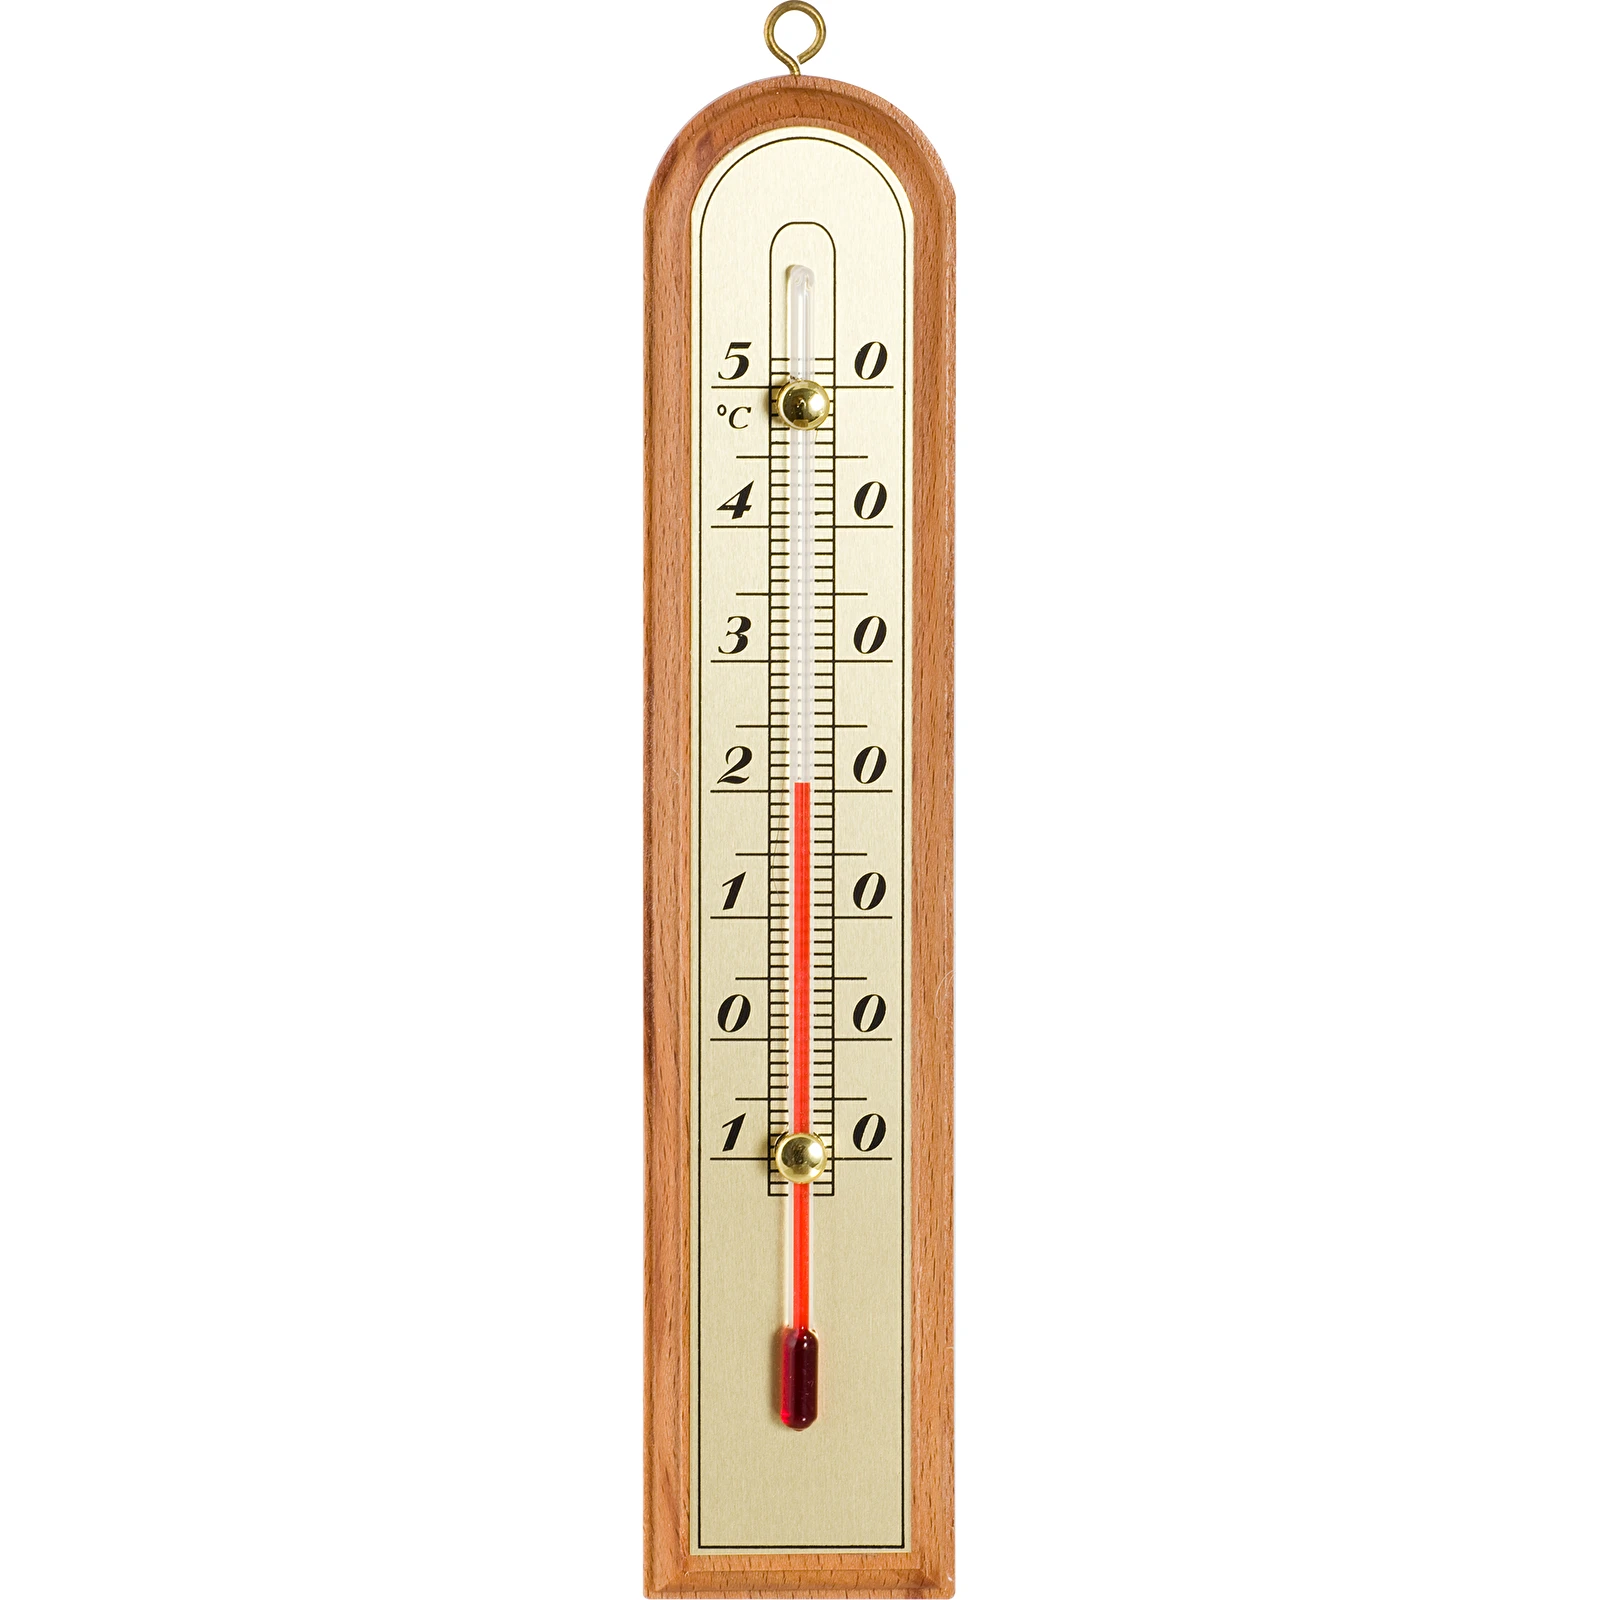 Indoor wooden wall thermometer with range from -10 to 50°C